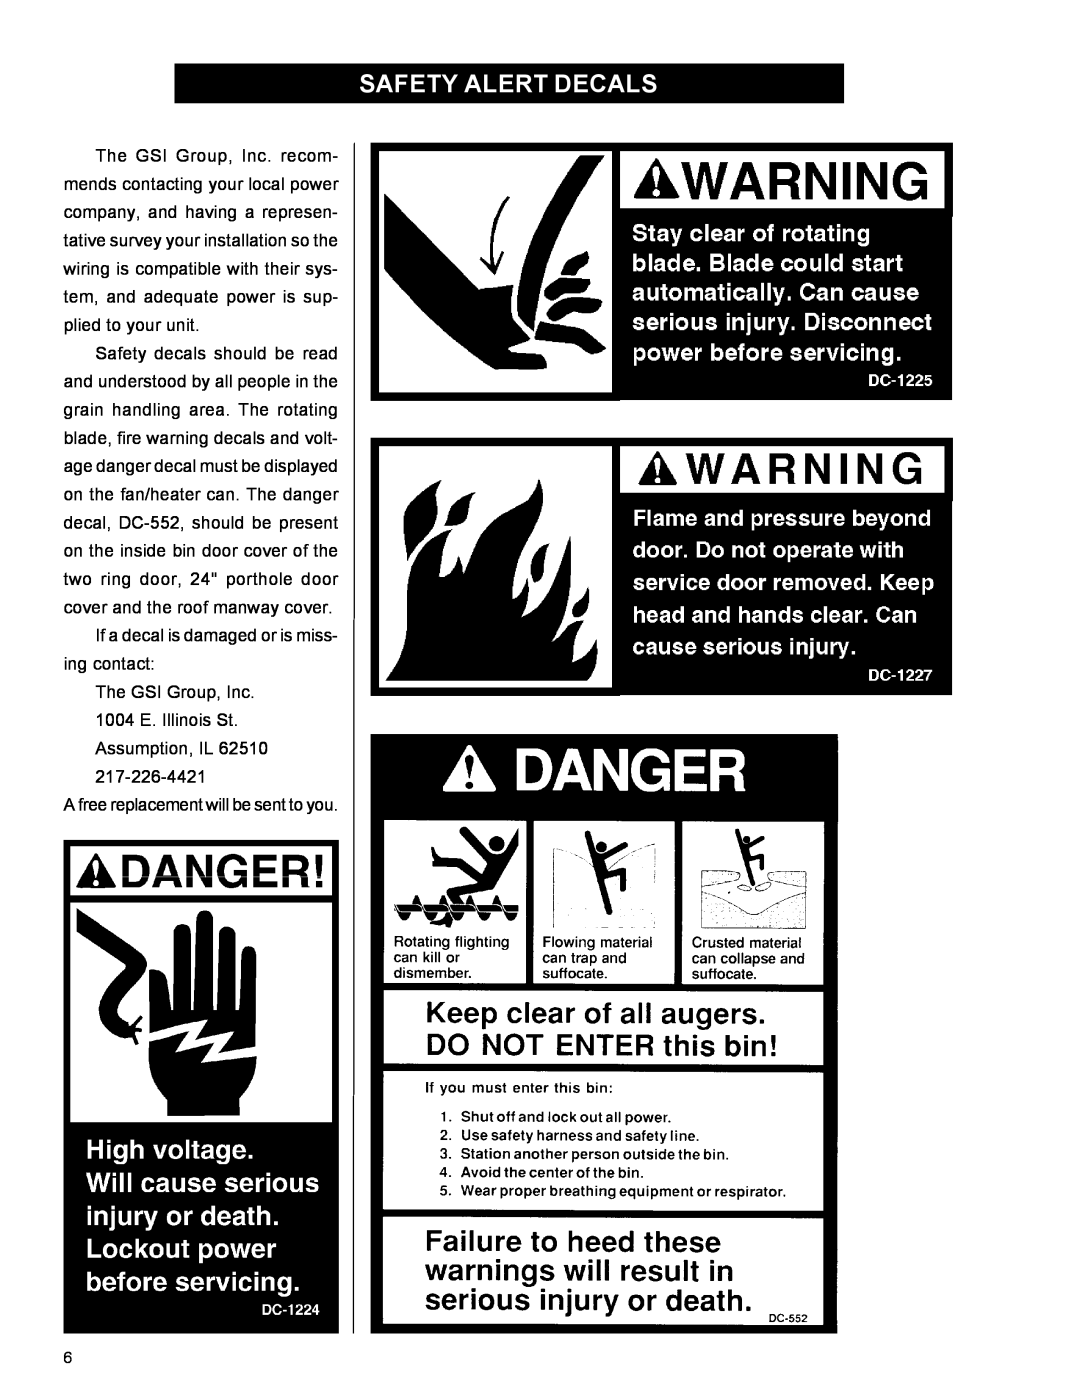 Airstream 18 owner manual Safety Alert Decals 